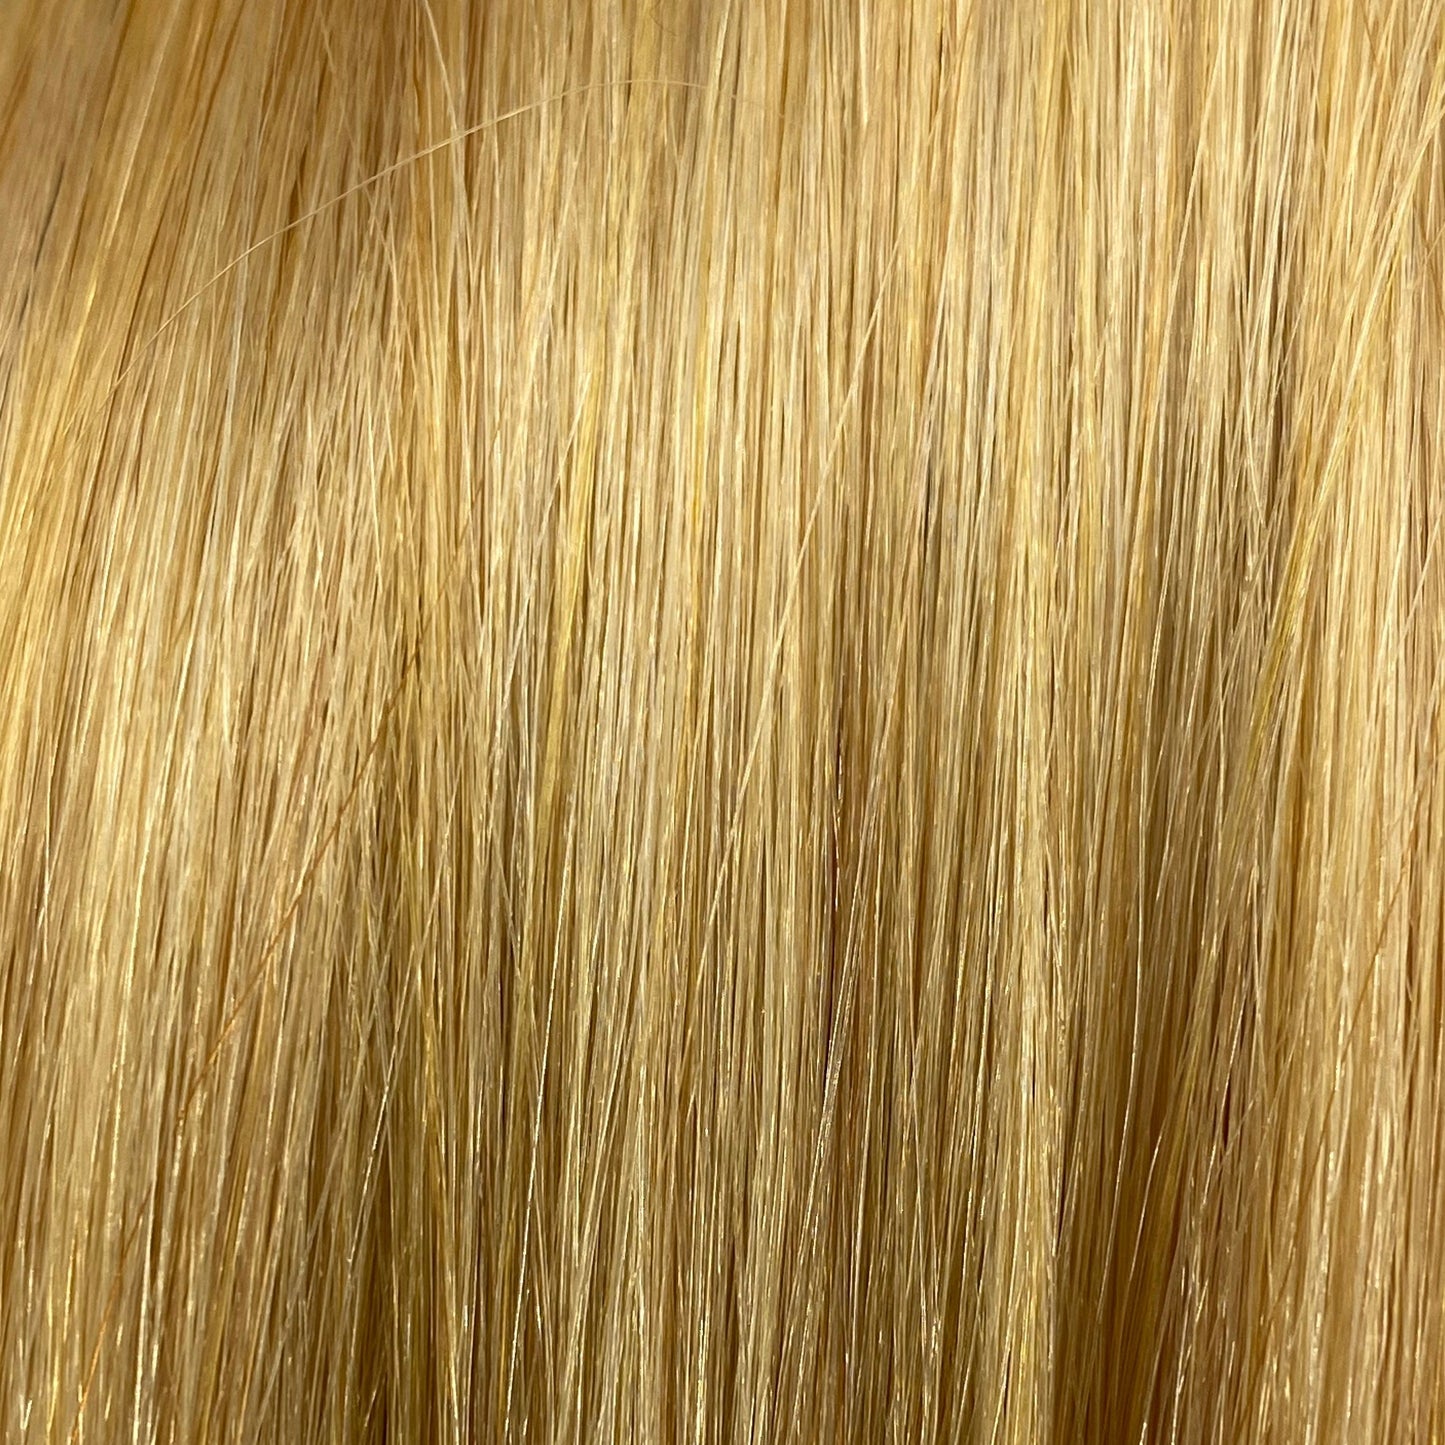 Fusion hair extensions #20 - 50cm/20 inches - Very Light Ultra Blonde Fusion Euro So Cap 